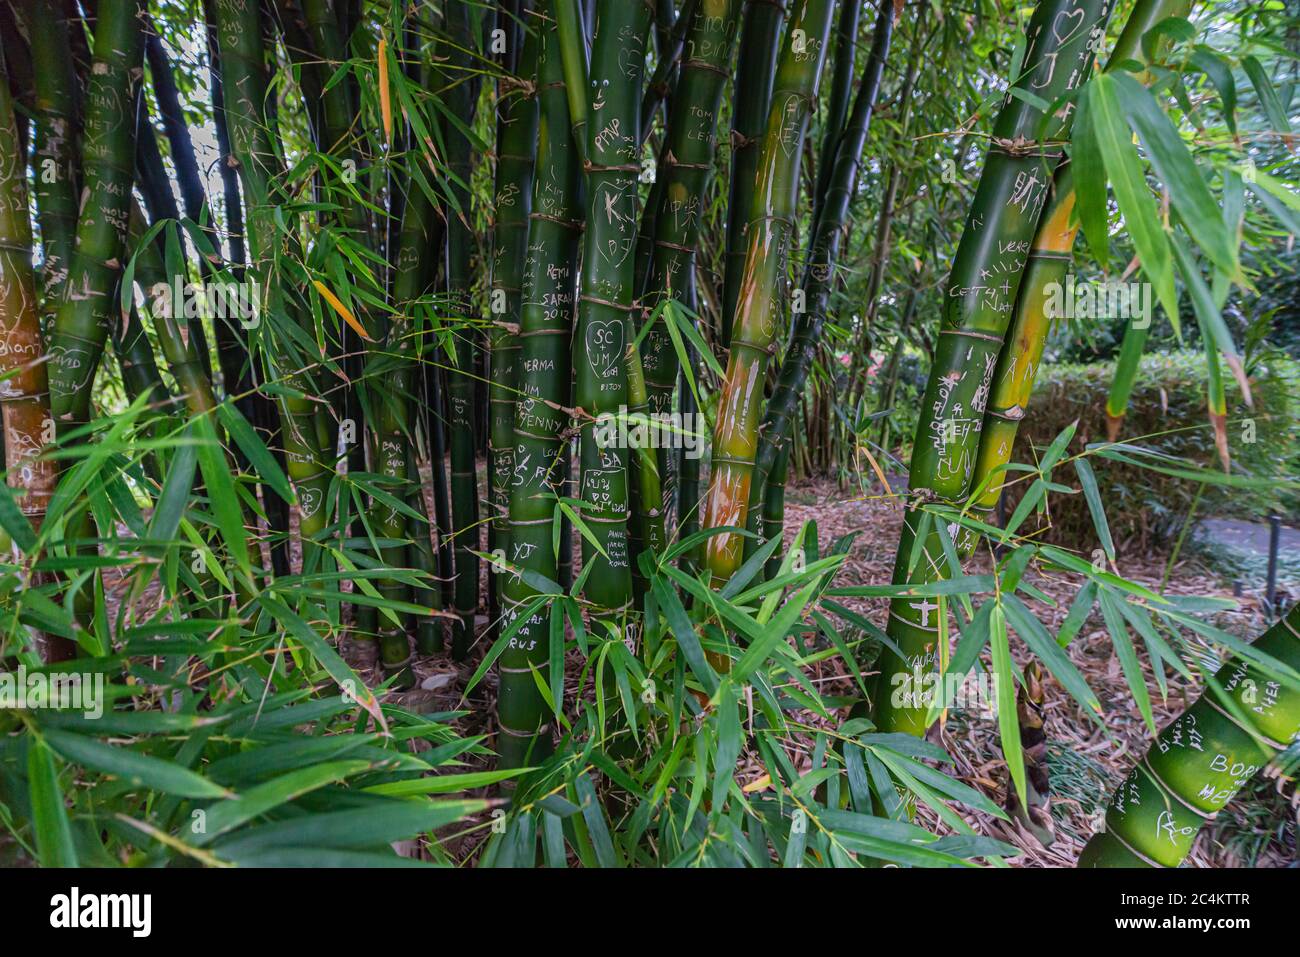 Bamboo plants with romantic love messages in Sydney, Australia Stock Photo